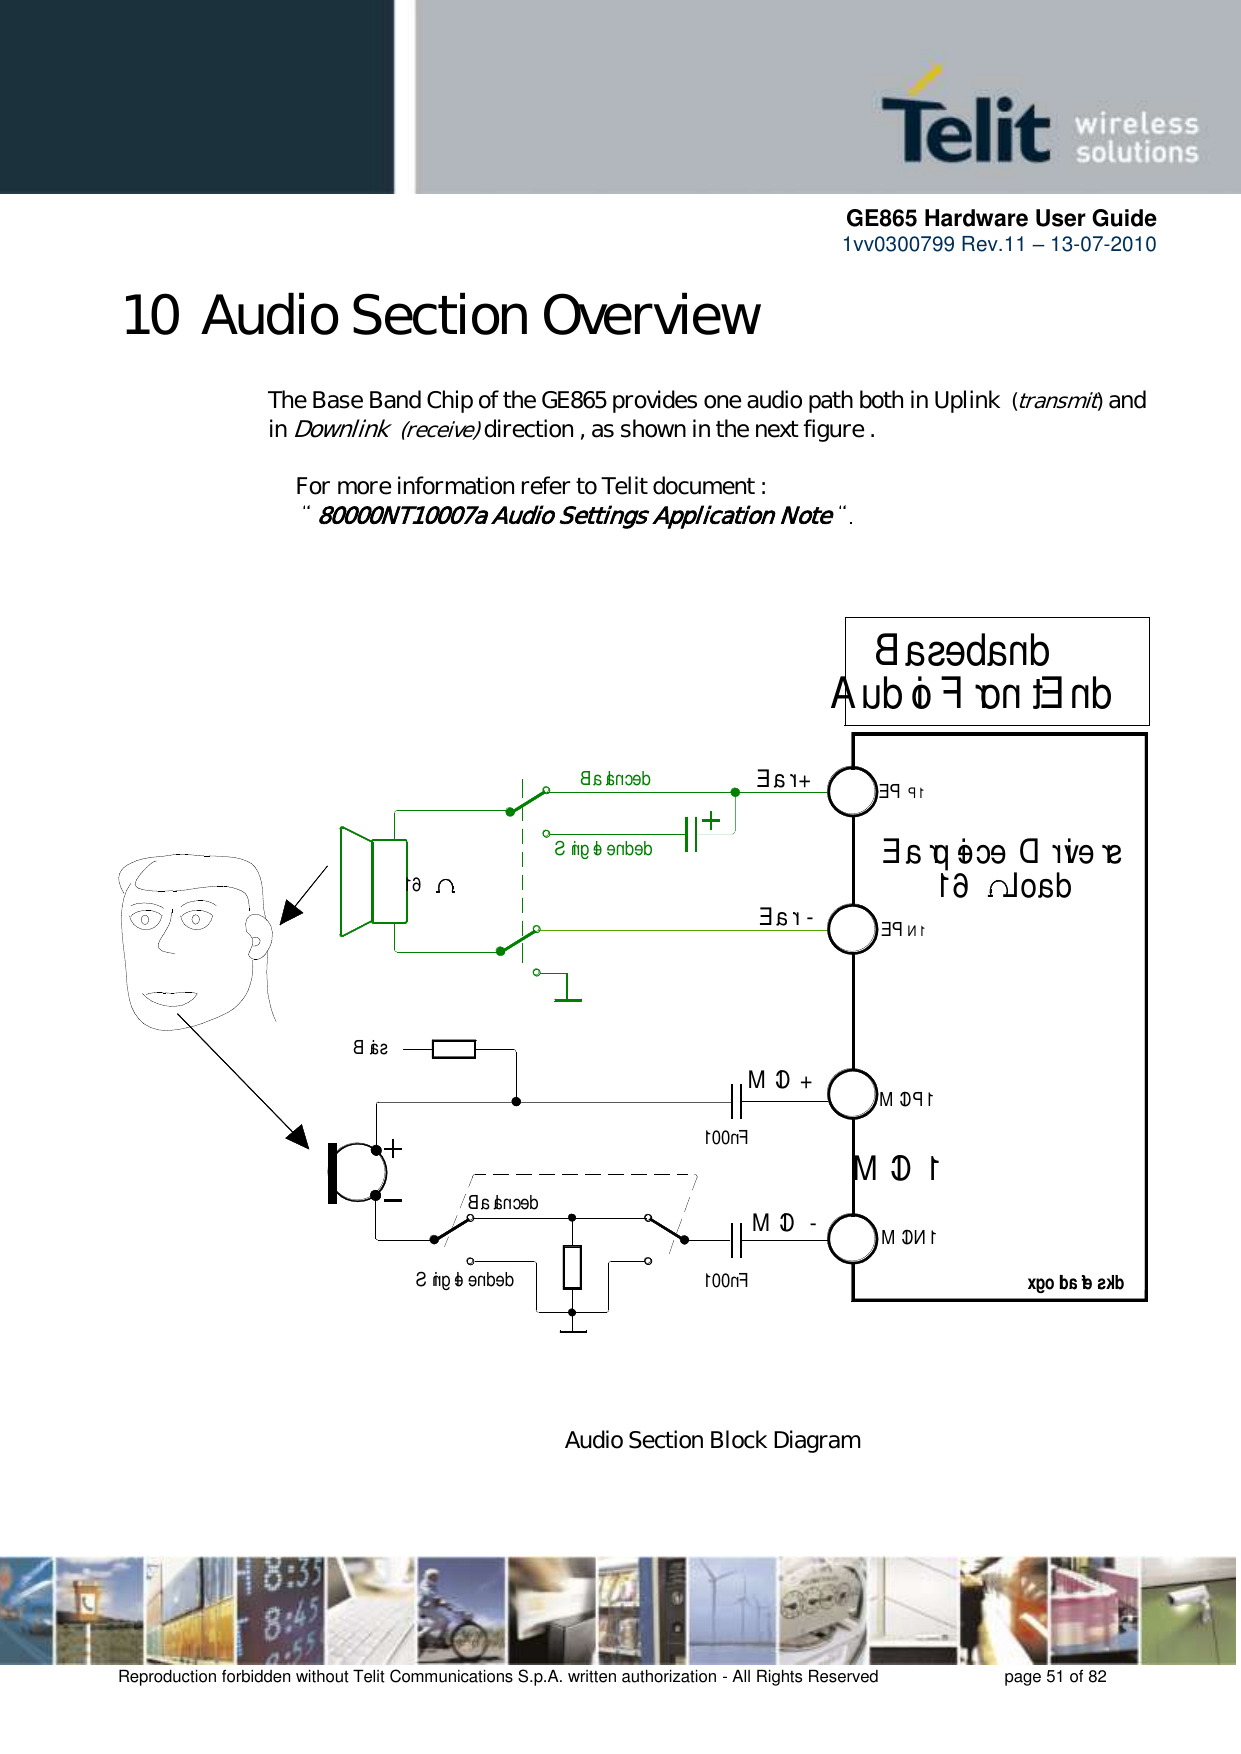      GE865 Hardware User Guide 1vv0300799 Rev.11 – 13-07-2010       Reproduction forbidden without Telit Communications S.p.A. written authorization - All Rights Reserved    page 51 of 82  10 Audio Section Overview The Base Band Chip of the GE865 provides one audio path both in Uplink  (transmit) and in Downlink  (receive) direction , as shown in the next figure .    For more information refer to Telit document :      80000NT10007a Audio Settings Application Note        Audio Section Block Diagram   Single endedBalancedBalancedSingle endedBias16MICN1MIC 1MICP1100nFMIC -100nFMIC +xgoldafe.skd    Baseband Audio Front EndEPN1EPP1Ear +Ear -Earpiece  Drivers       16    Load